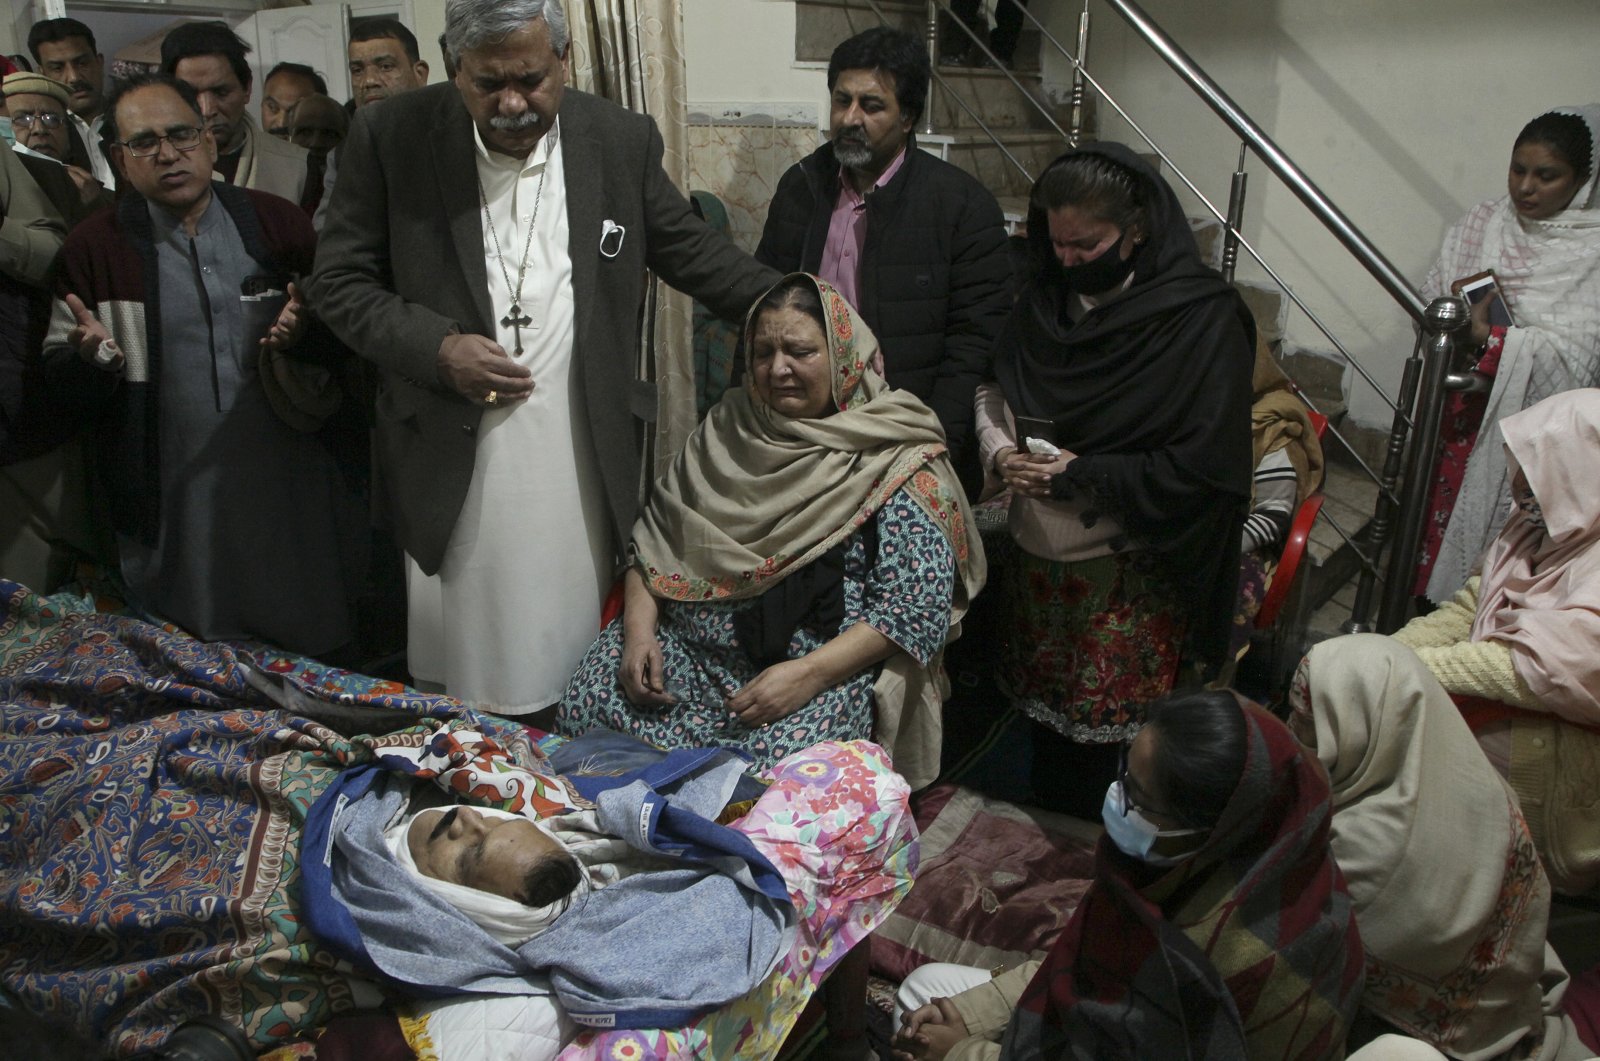 Relatives of Christian priest Father William Siraj, 75, who was killed by unknown gunmen, mourn next to his body at his home in Peshawar, Pakistan, Jan. 30, 2022. (AP Photo)